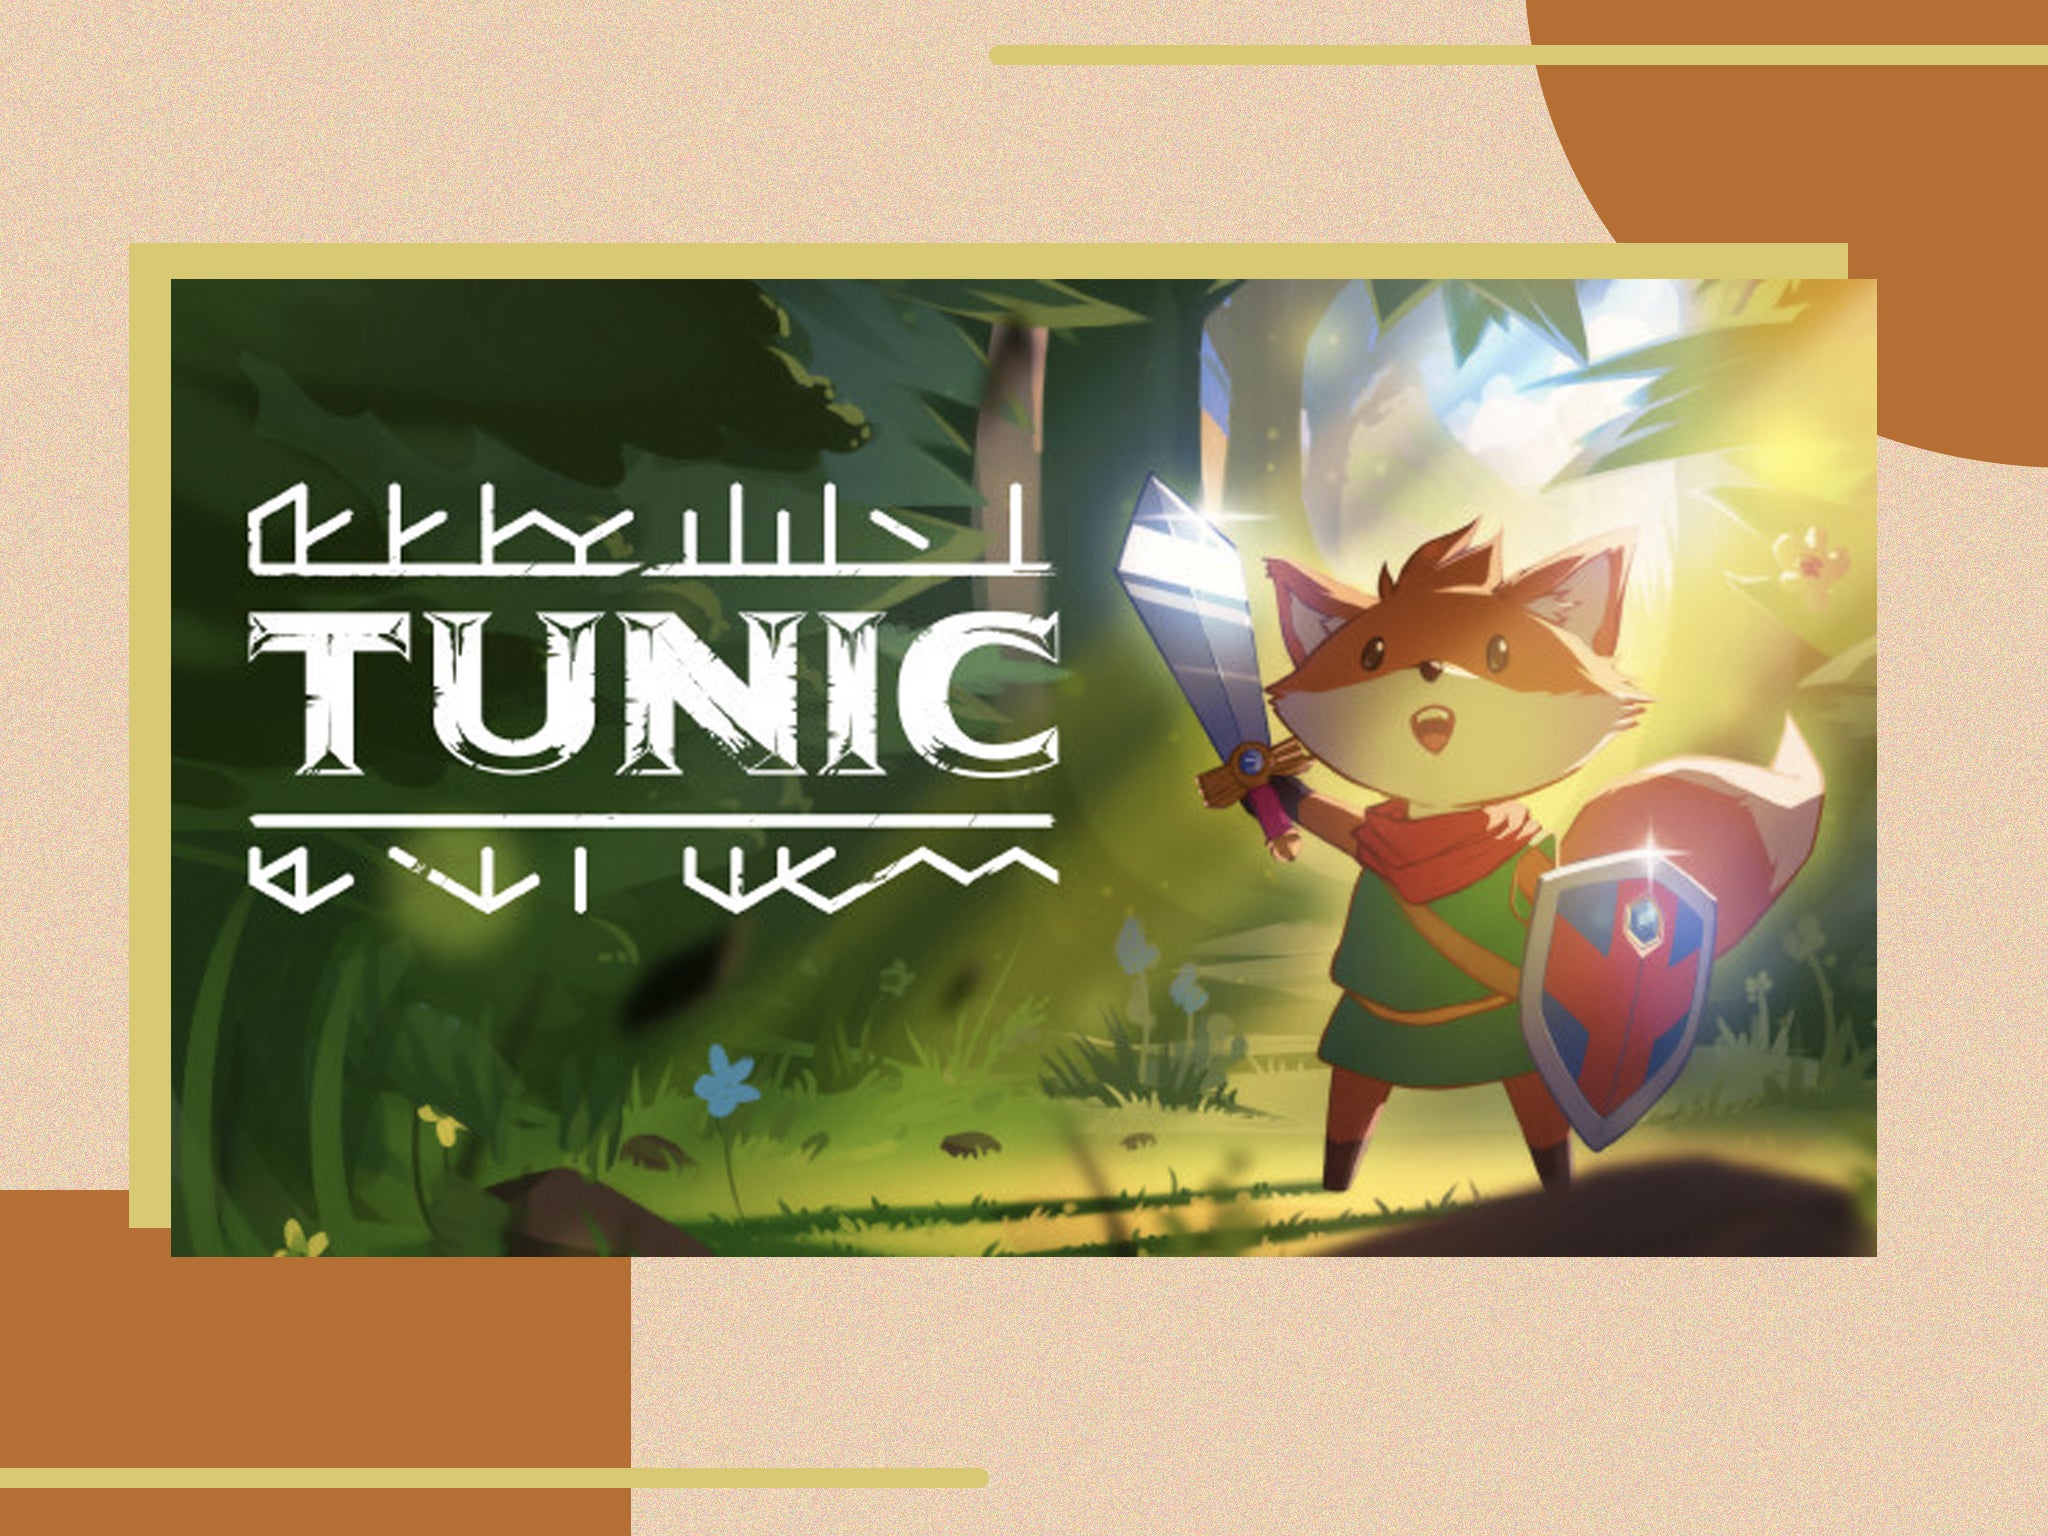 TUNIC - Switch Review